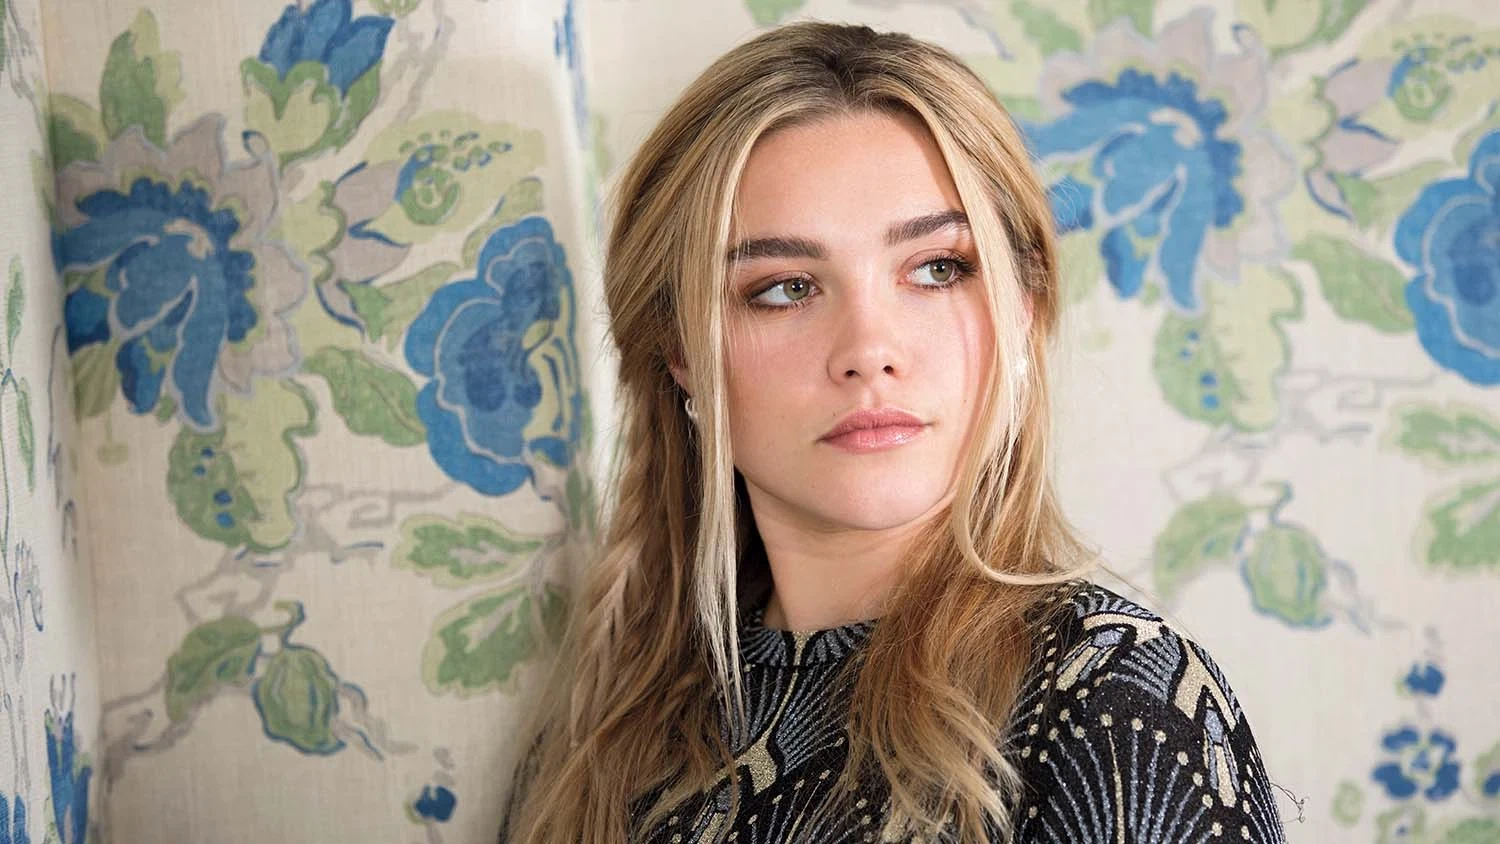 Florence Pugh was asked to modify eyebrows